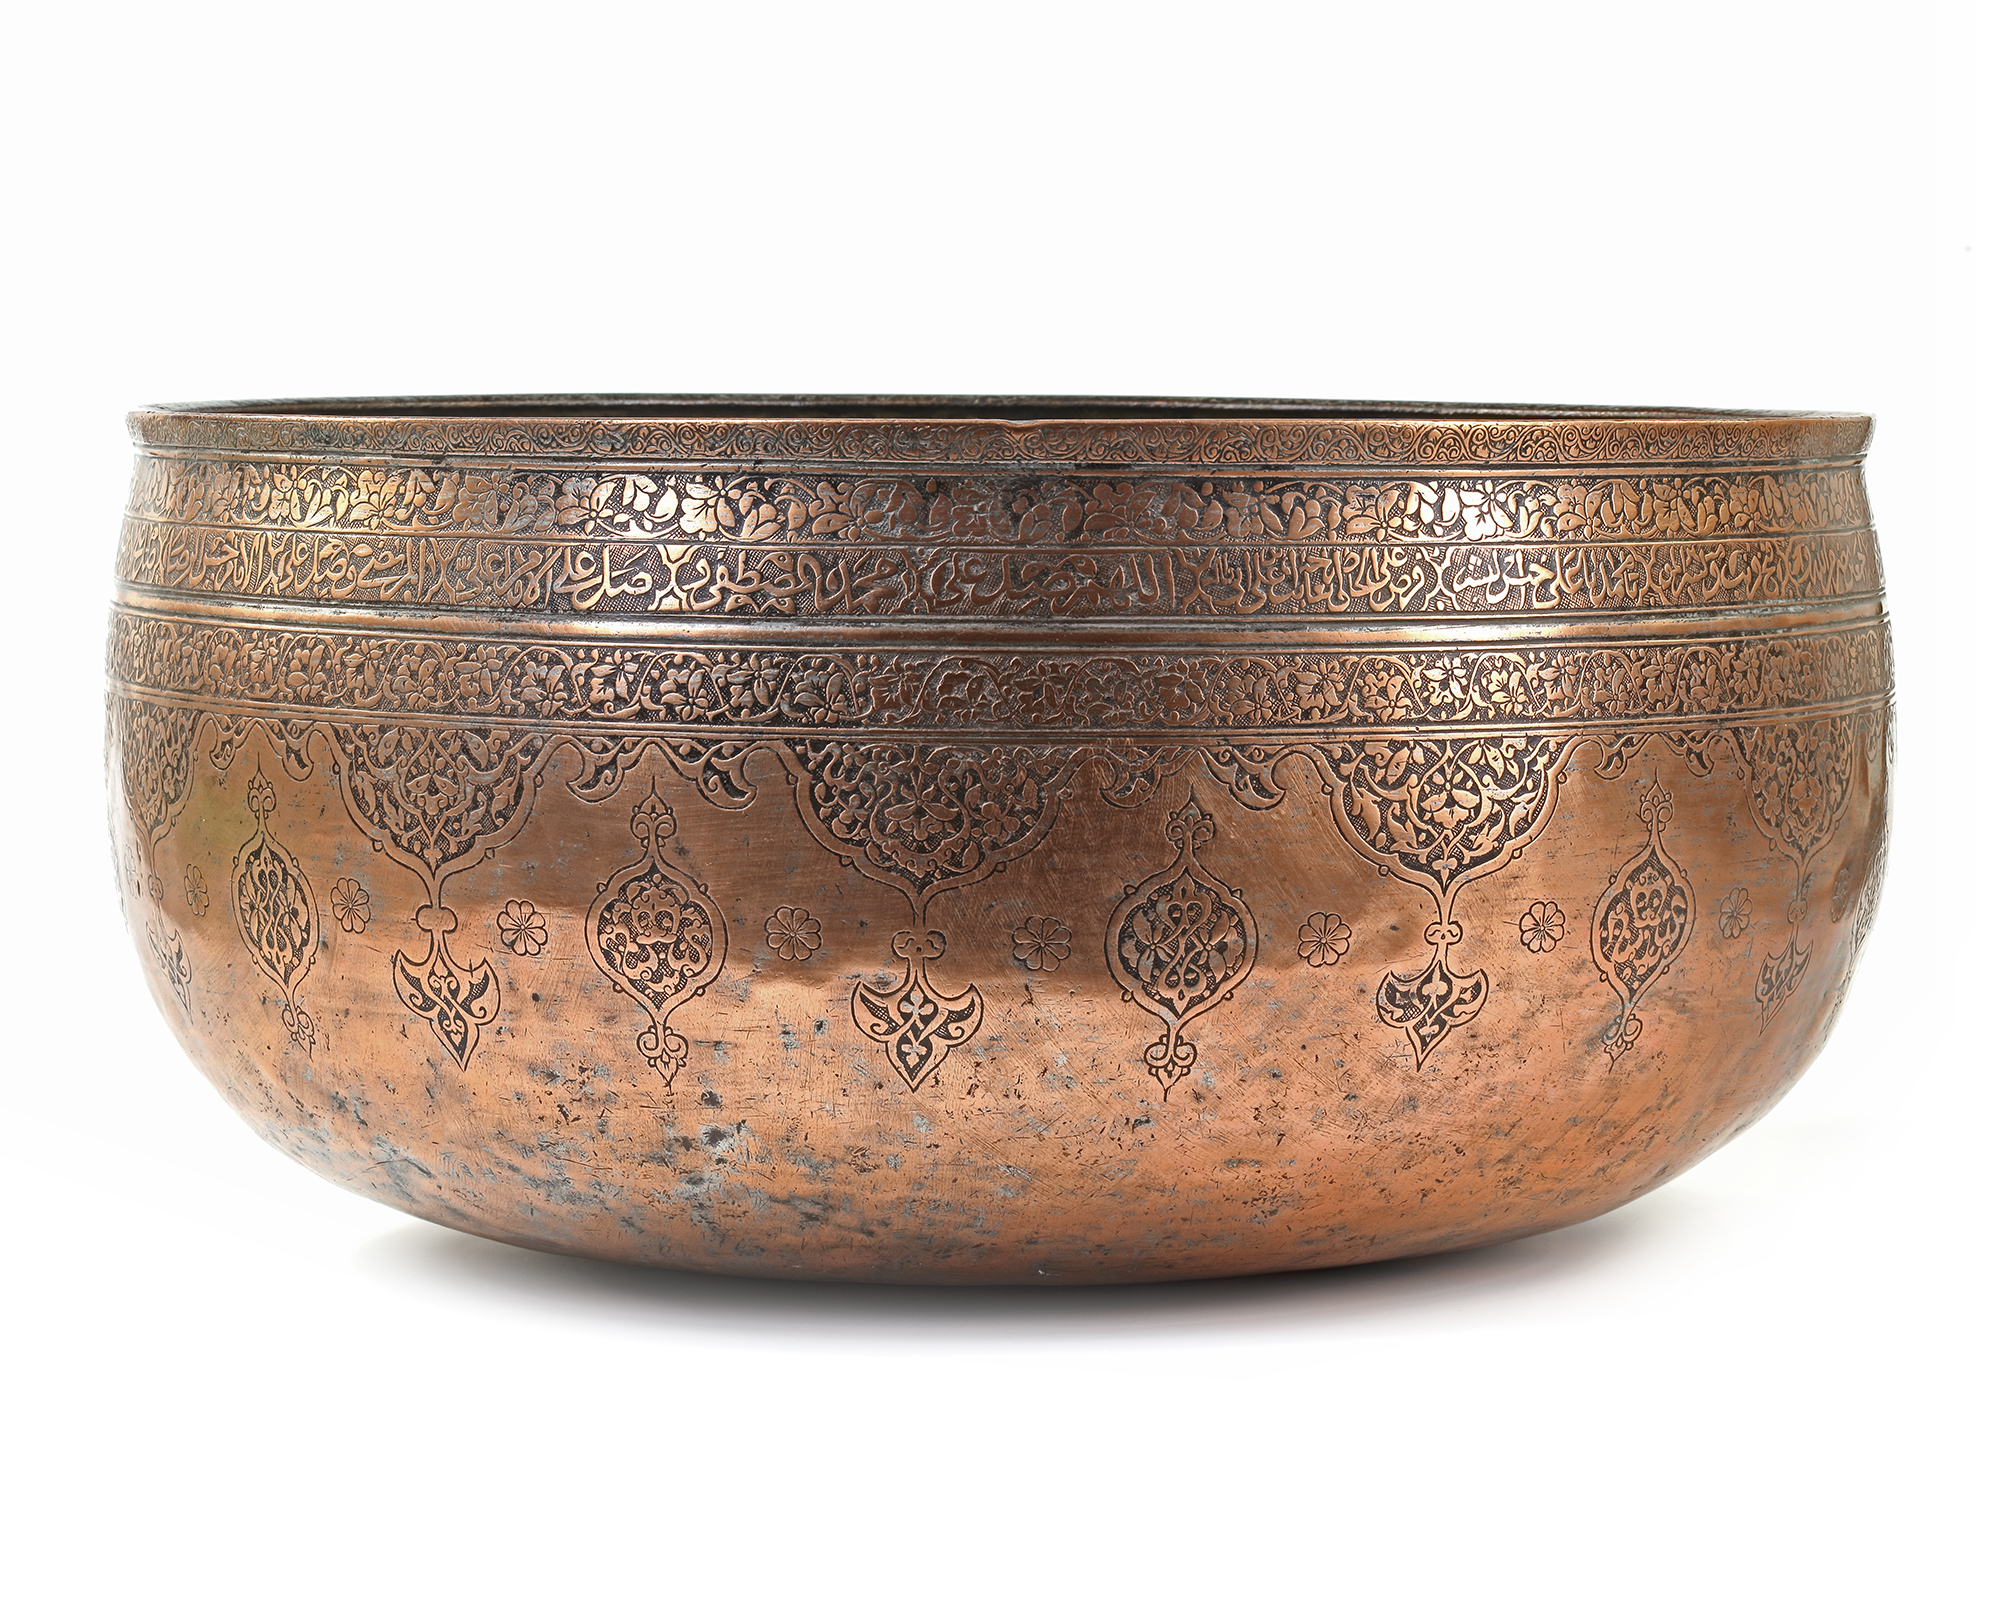 A MONUMENTAL LATE TIMURID ENGRAVED COPPER BOWL, CENTRAL ASIA, LATE 15TH-EARLY 16TH CENTURY